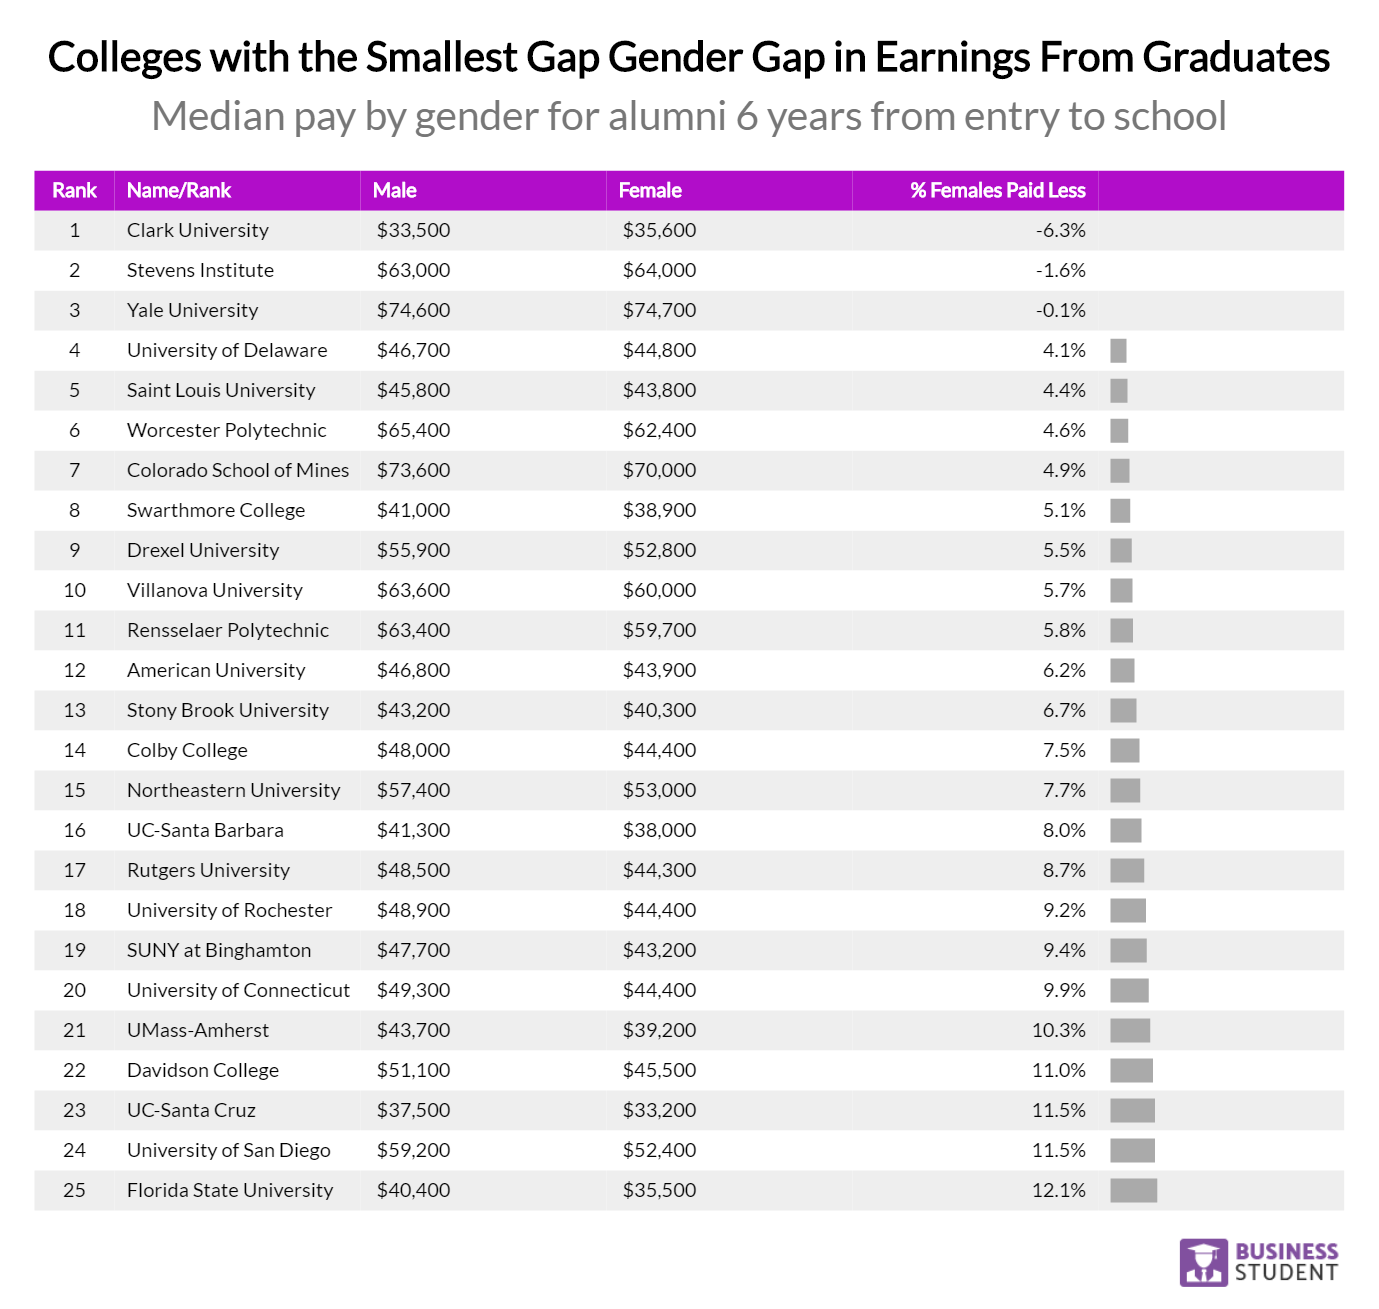 colleges with the smallest gap gender gap in earnings from graduates 2018 12 04T21 51 00.119Z